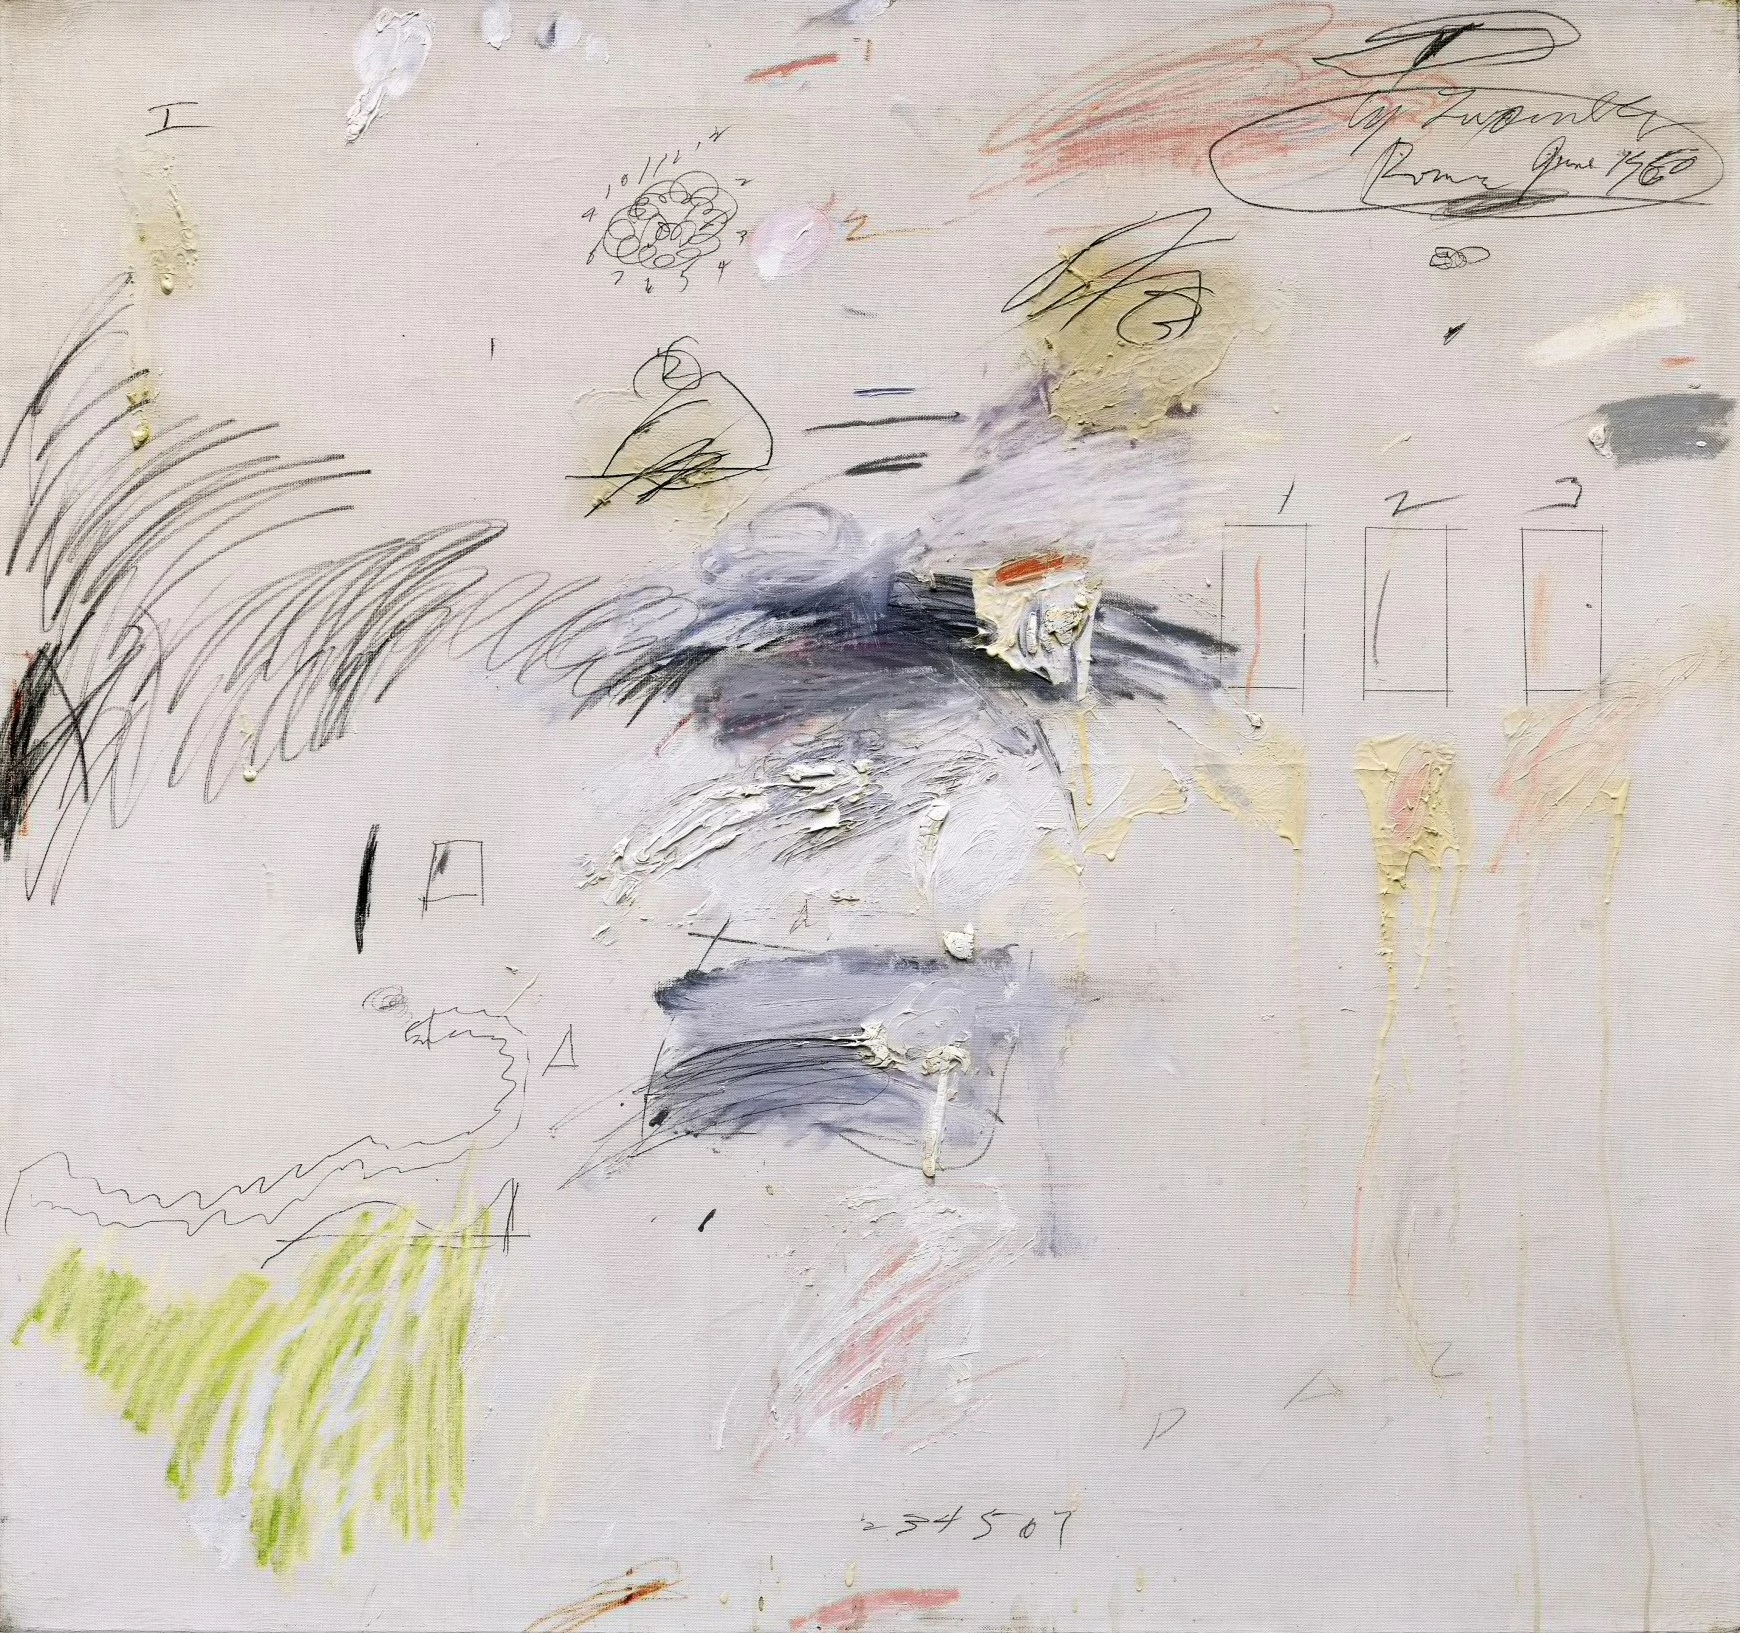 Untitled (Rome, June 1960), Cy Twombly